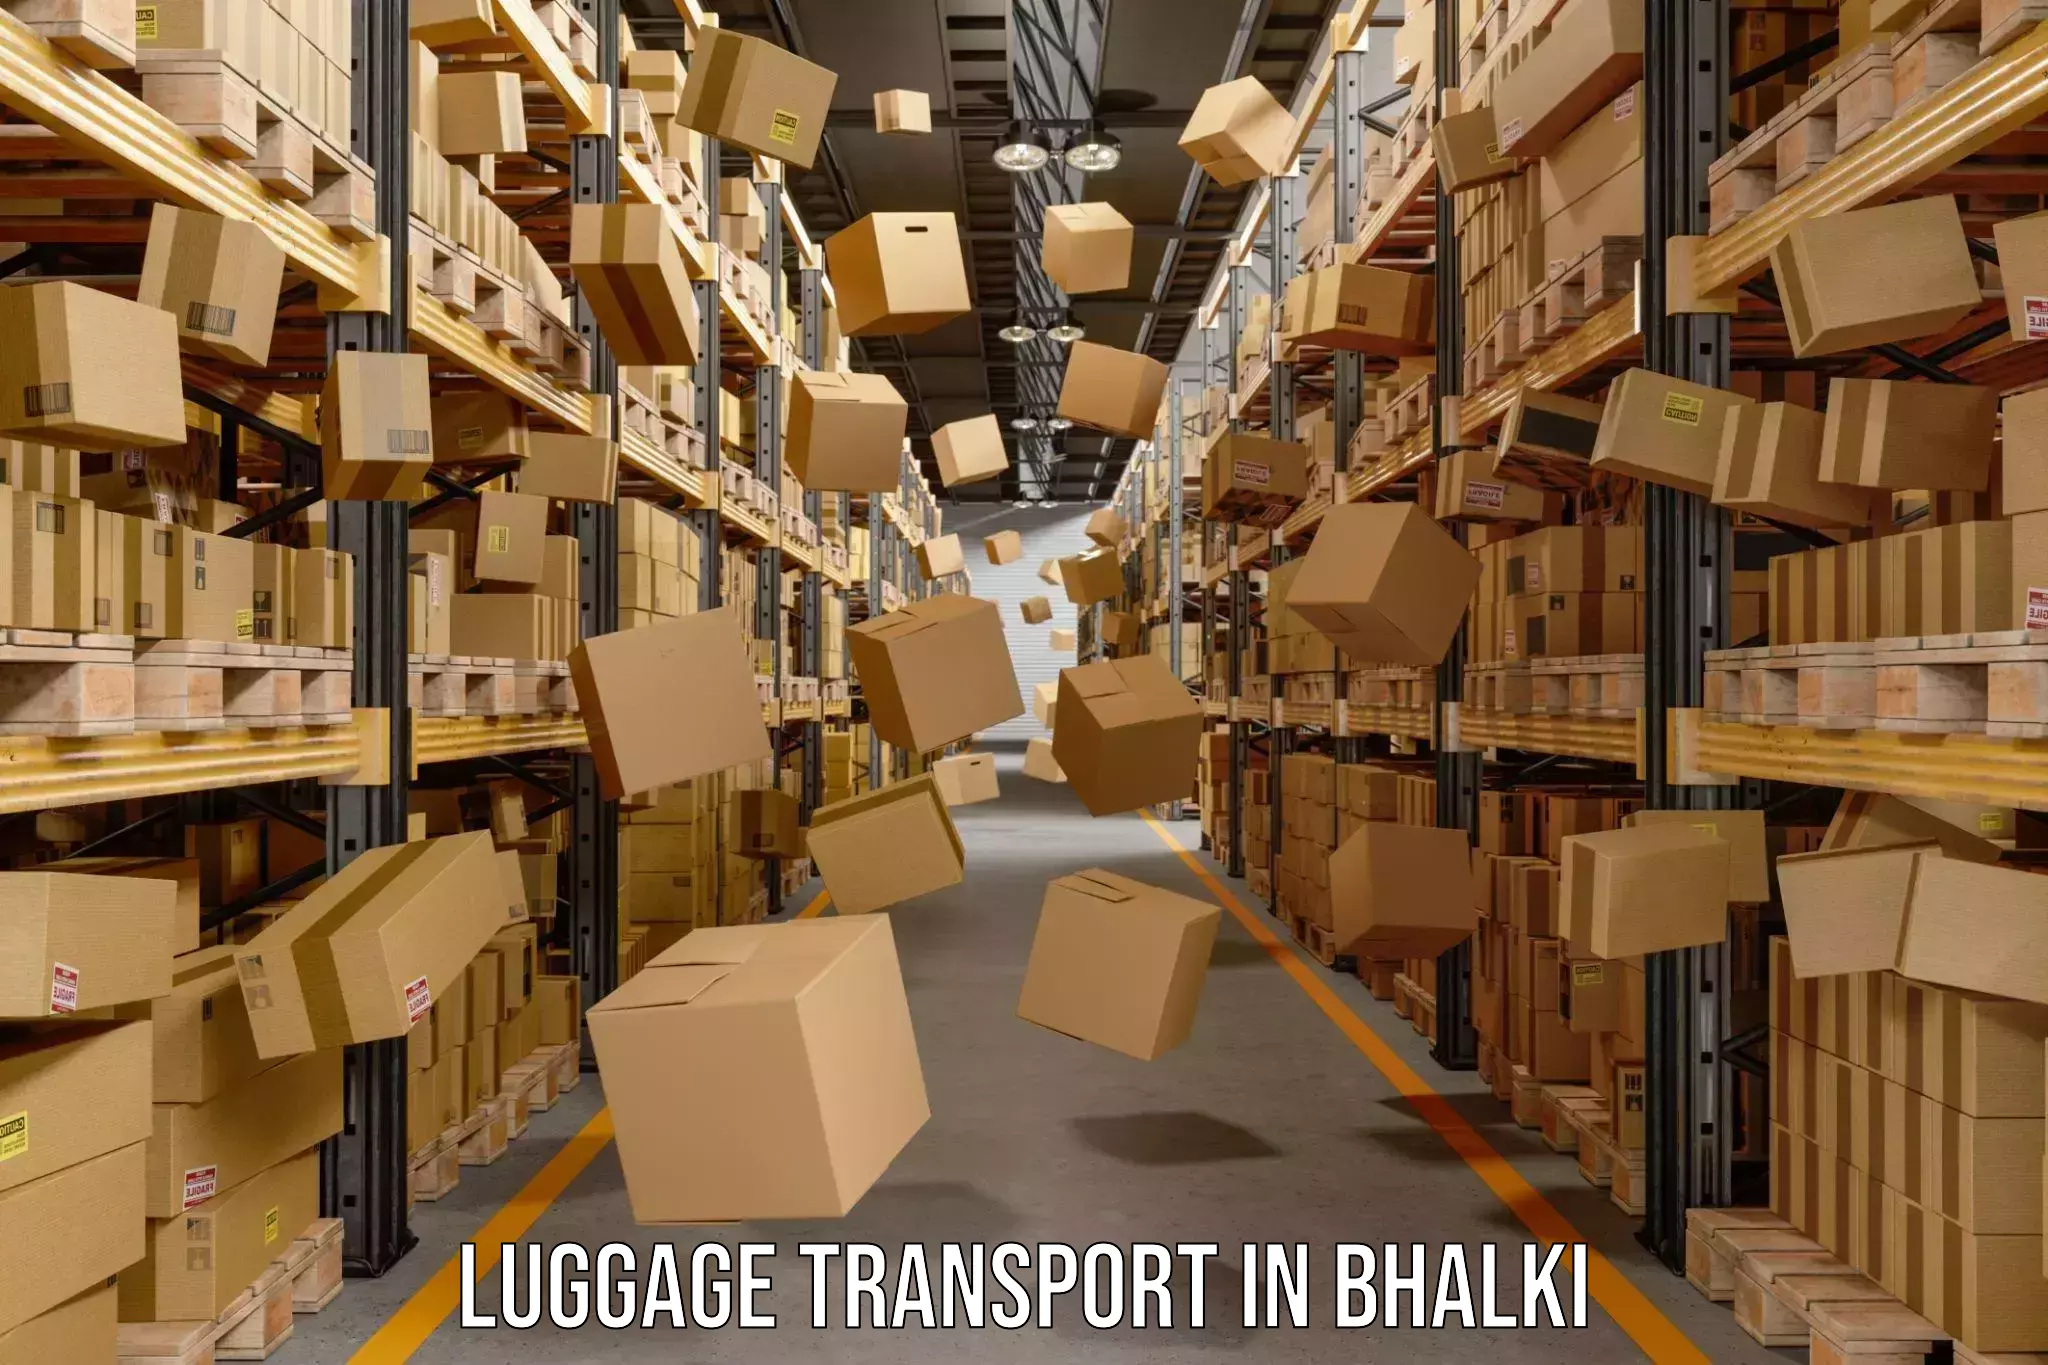 Luggage delivery operations in Bhalki